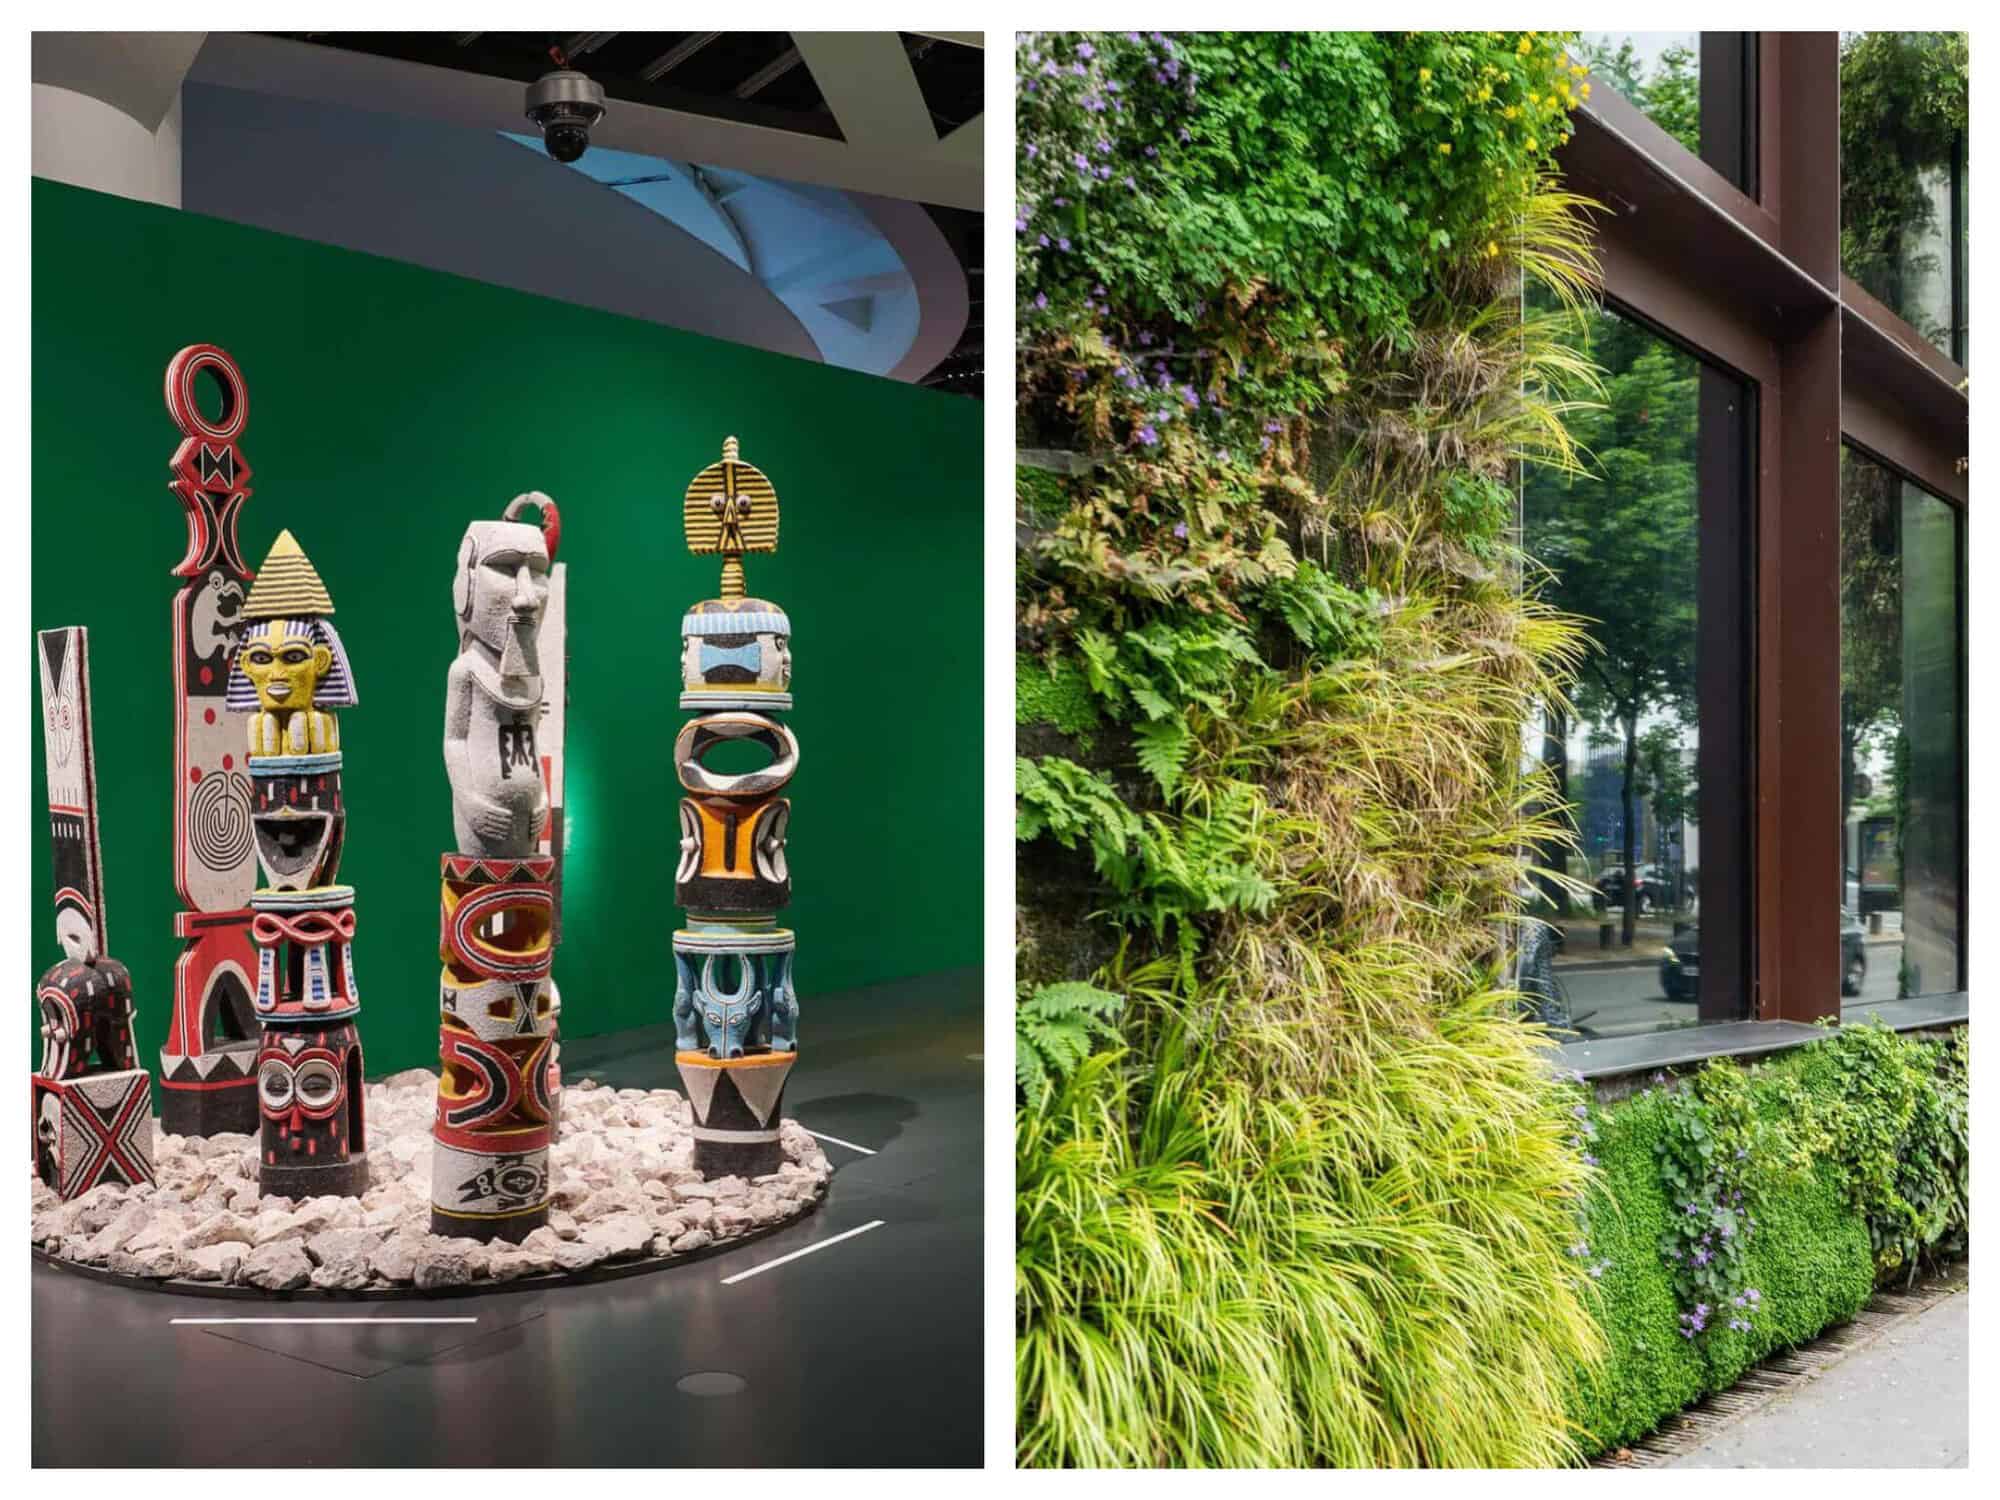 (Left) Indigenous sculptures stand on top of a circle made of rocks in front of a green wall. / (Right) A close-up of a building with green plants on its walls next to a windowpane. 